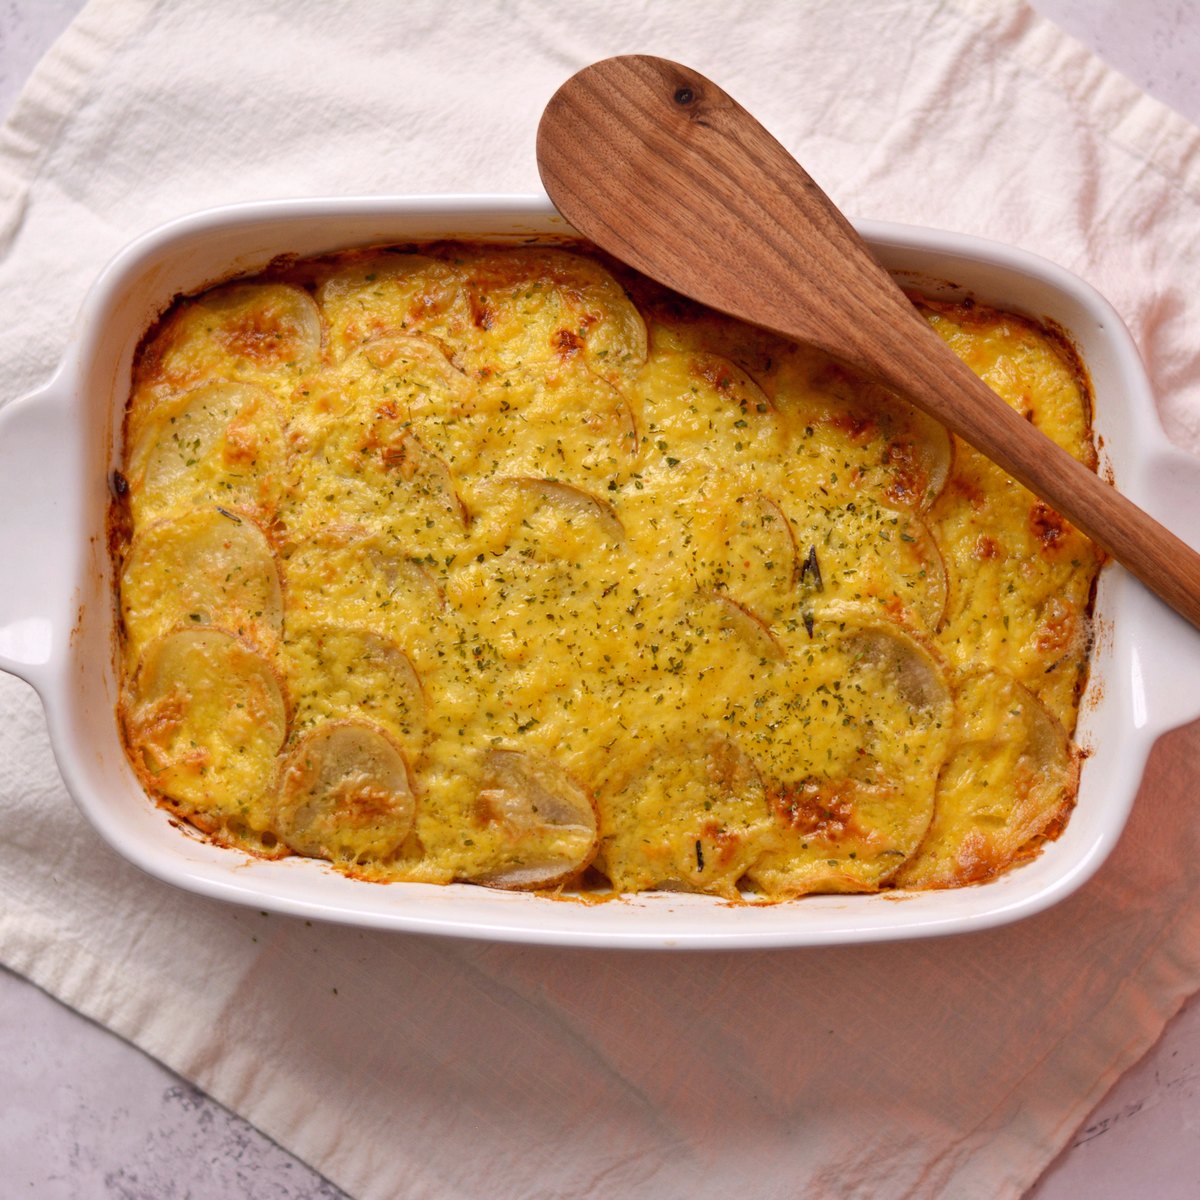 Scalloped potatoes without cream in a white casserole dish.